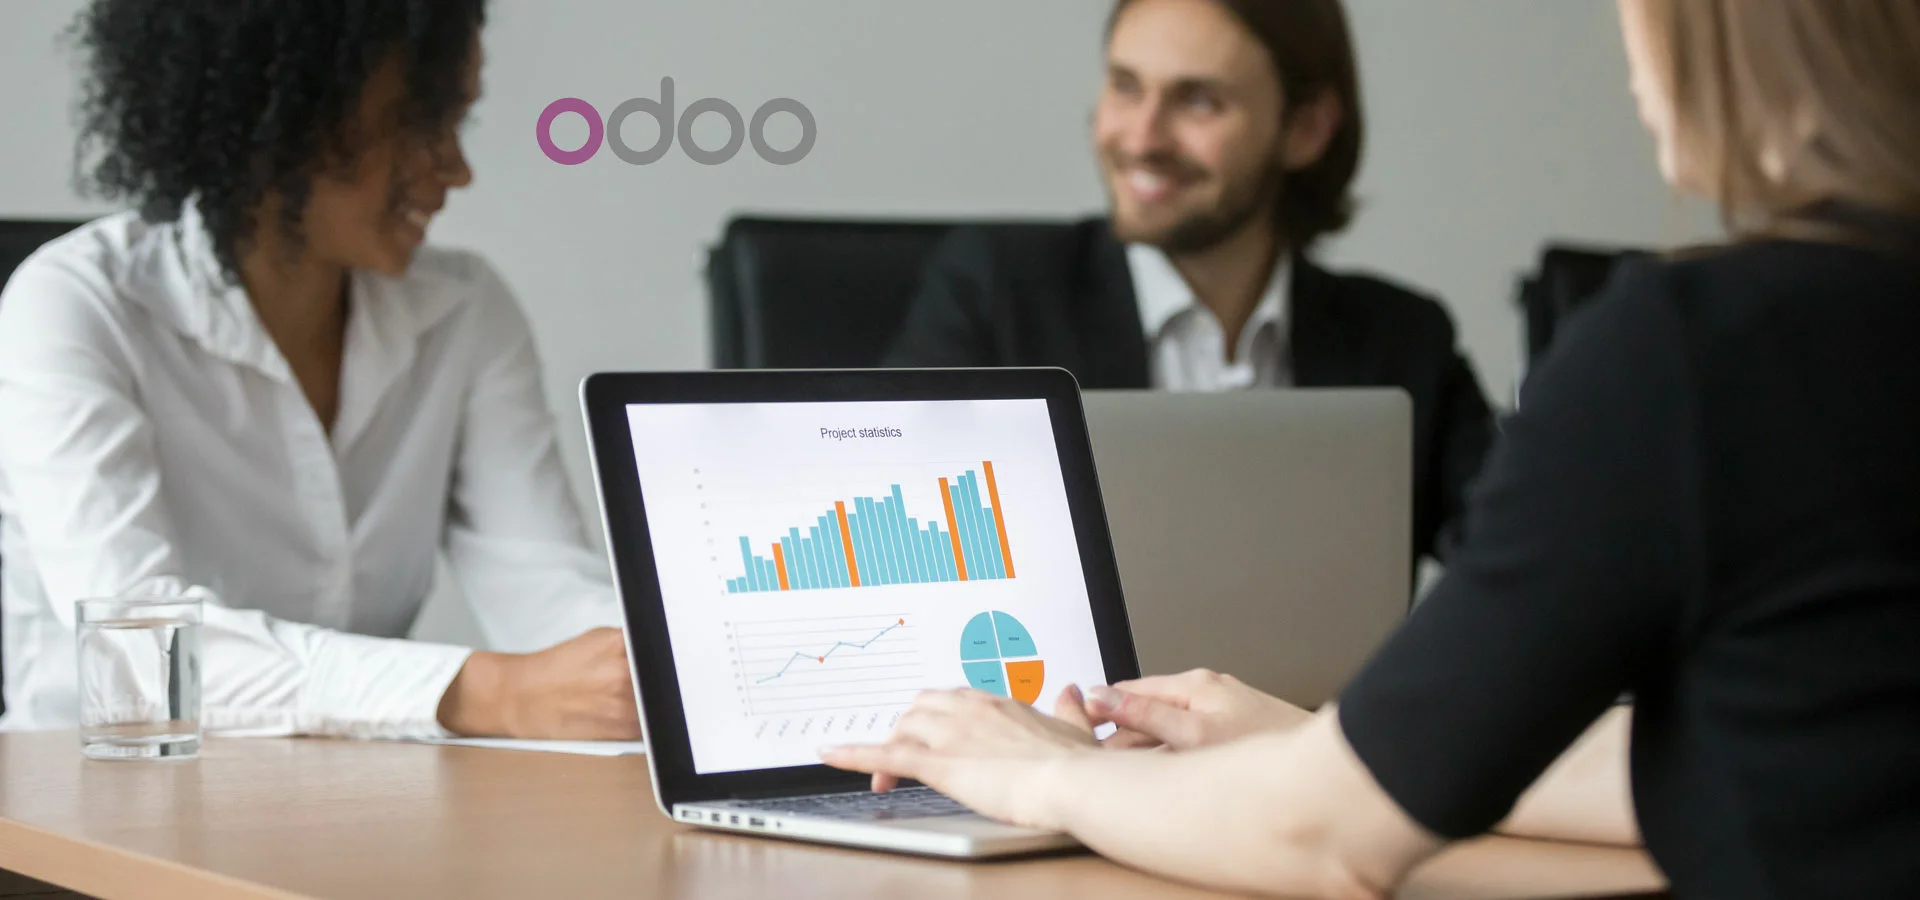 odoo-erp-support-and-services-related-blog-105